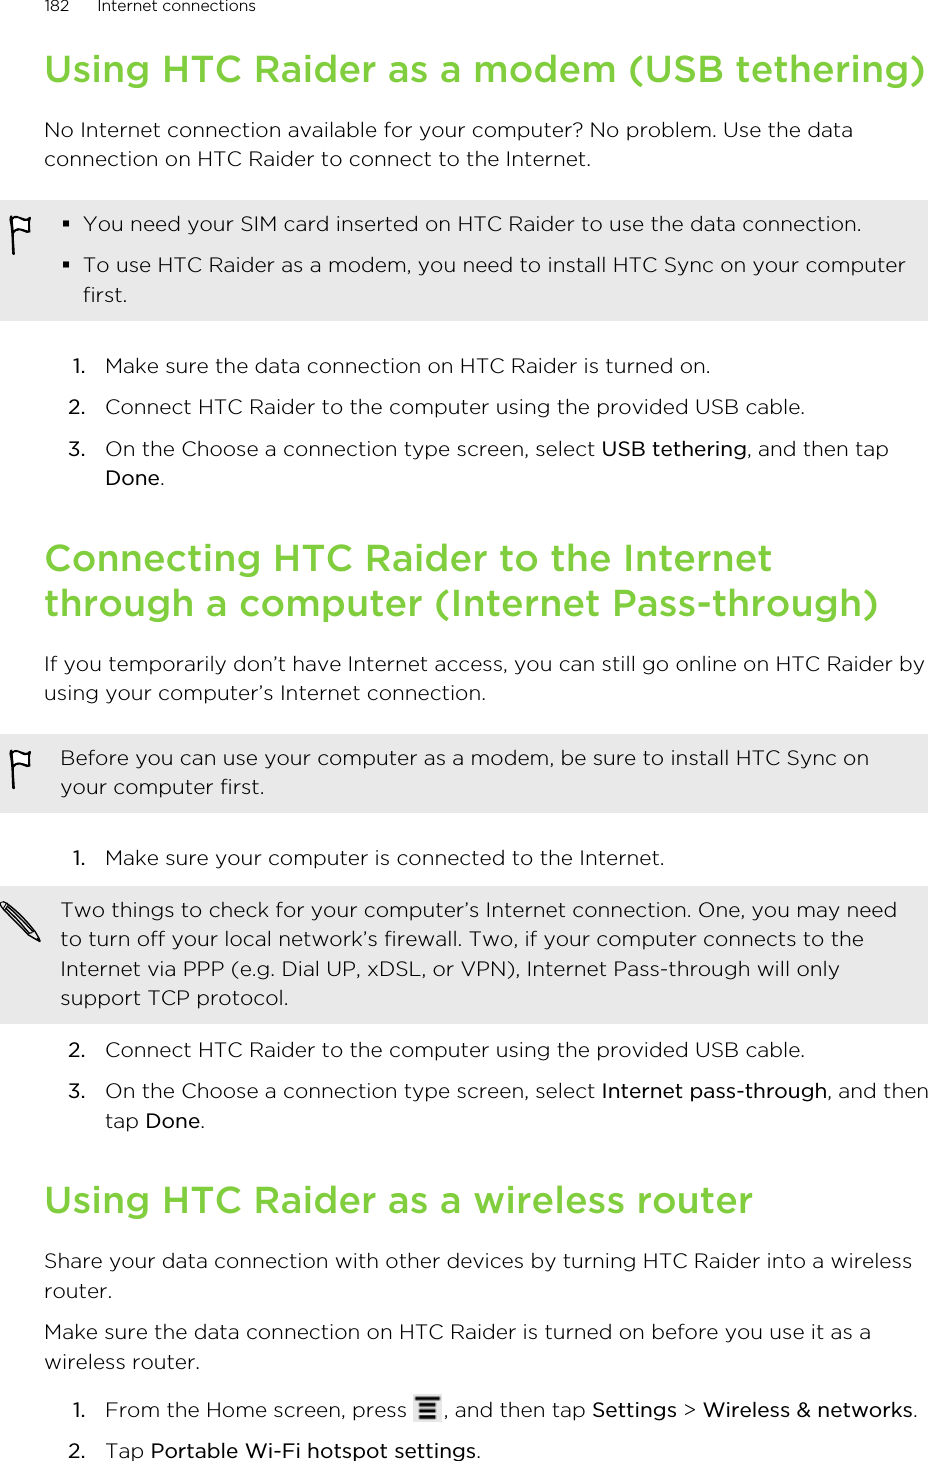 Using HTC Raider as a modem (USB tethering)No Internet connection available for your computer? No problem. Use the dataconnection on HTC Raider to connect to the Internet.§You need your SIM card inserted on HTC Raider to use the data connection.§To use HTC Raider as a modem, you need to install HTC Sync on your computerfirst.1. Make sure the data connection on HTC Raider is turned on.2. Connect HTC Raider to the computer using the provided USB cable.3. On the Choose a connection type screen, select USB tethering, and then tapDone.Connecting HTC Raider to the Internetthrough a computer (Internet Pass-through)If you temporarily don’t have Internet access, you can still go online on HTC Raider byusing your computer’s Internet connection.Before you can use your computer as a modem, be sure to install HTC Sync onyour computer first.1. Make sure your computer is connected to the Internet. Two things to check for your computer’s Internet connection. One, you may needto turn off your local network’s firewall. Two, if your computer connects to theInternet via PPP (e.g. Dial UP, xDSL, or VPN), Internet Pass-through will onlysupport TCP protocol.2. Connect HTC Raider to the computer using the provided USB cable.3. On the Choose a connection type screen, select Internet pass-through, and thentap Done.Using HTC Raider as a wireless routerShare your data connection with other devices by turning HTC Raider into a wirelessrouter.Make sure the data connection on HTC Raider is turned on before you use it as awireless router.1. From the Home screen, press  , and then tap Settings &gt; Wireless &amp; networks.2. Tap Portable Wi-Fi hotspot settings.182 Internet connections